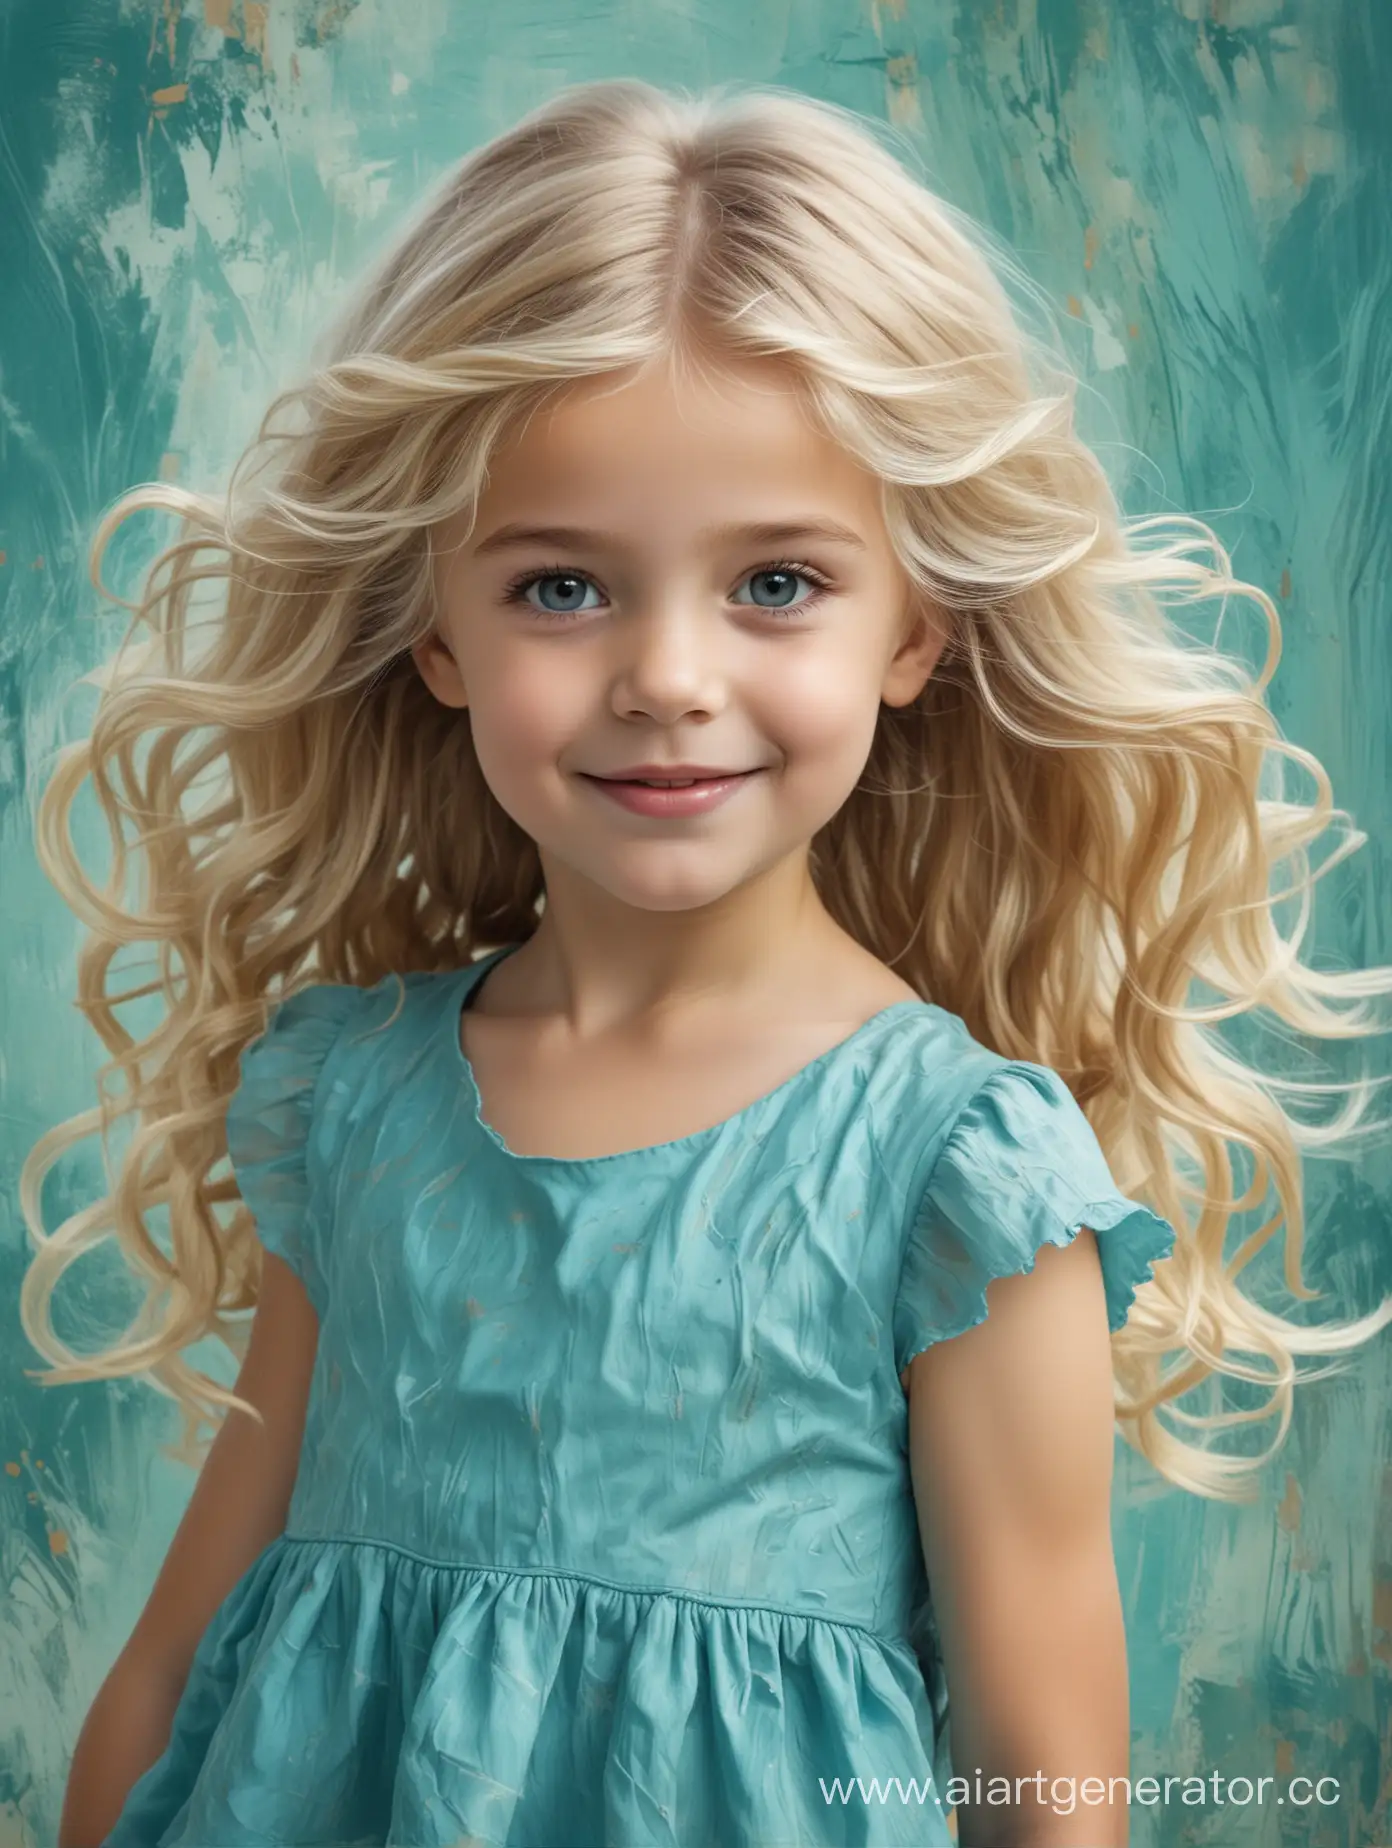 a 5-year-old girl, blue dress, blonde hair gathered in a wavy hairstyle, background texture brush strokes turquoise